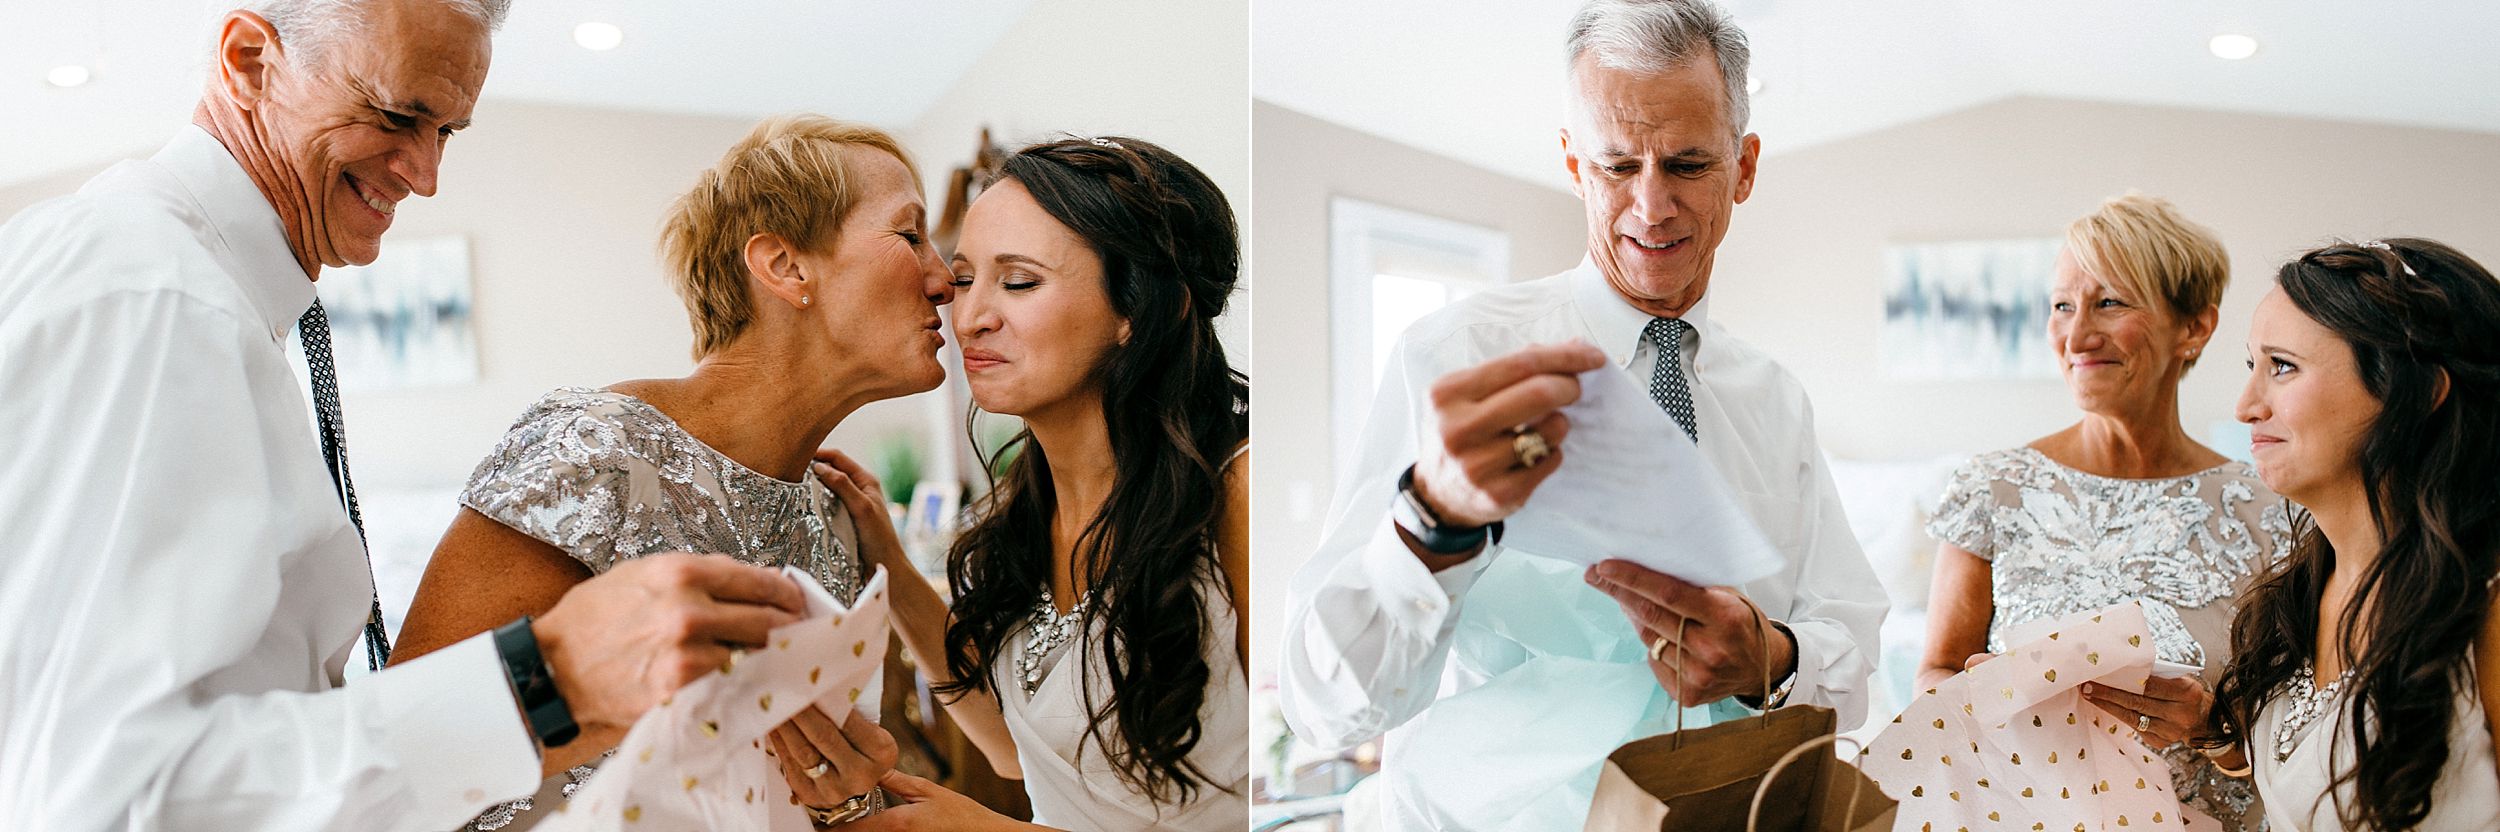 Father Daughter Moments from an Intimate Wedding